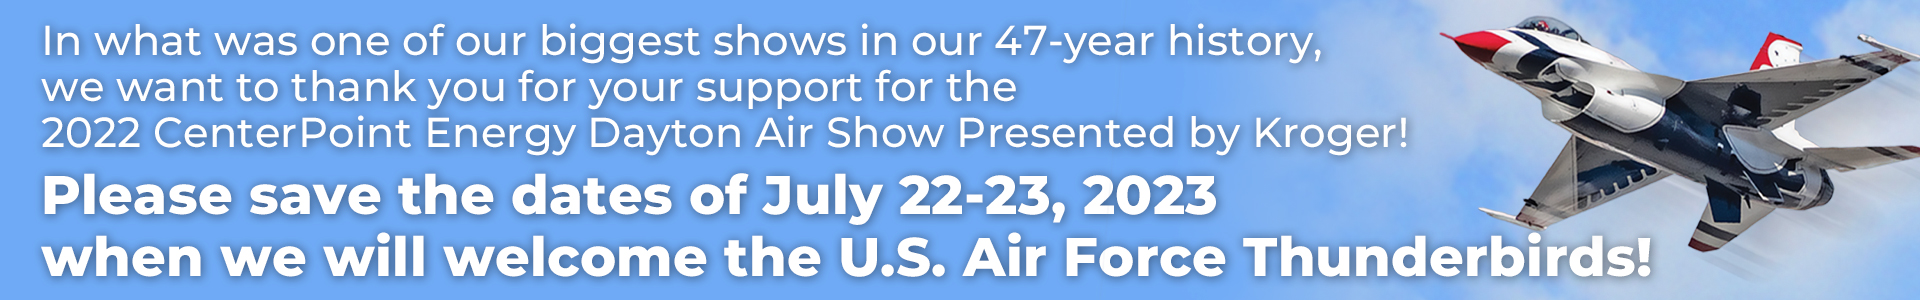 Thank you! In what was one of our biggest shows in our 47-year history, we want to thank you for your support for the 2022 CenterPoint Engery Dayton Air Show Presented by Kroger! - Please save the dates of July 22-23, 2023 when we welcome the U.S. Air Force Thunderbirds!